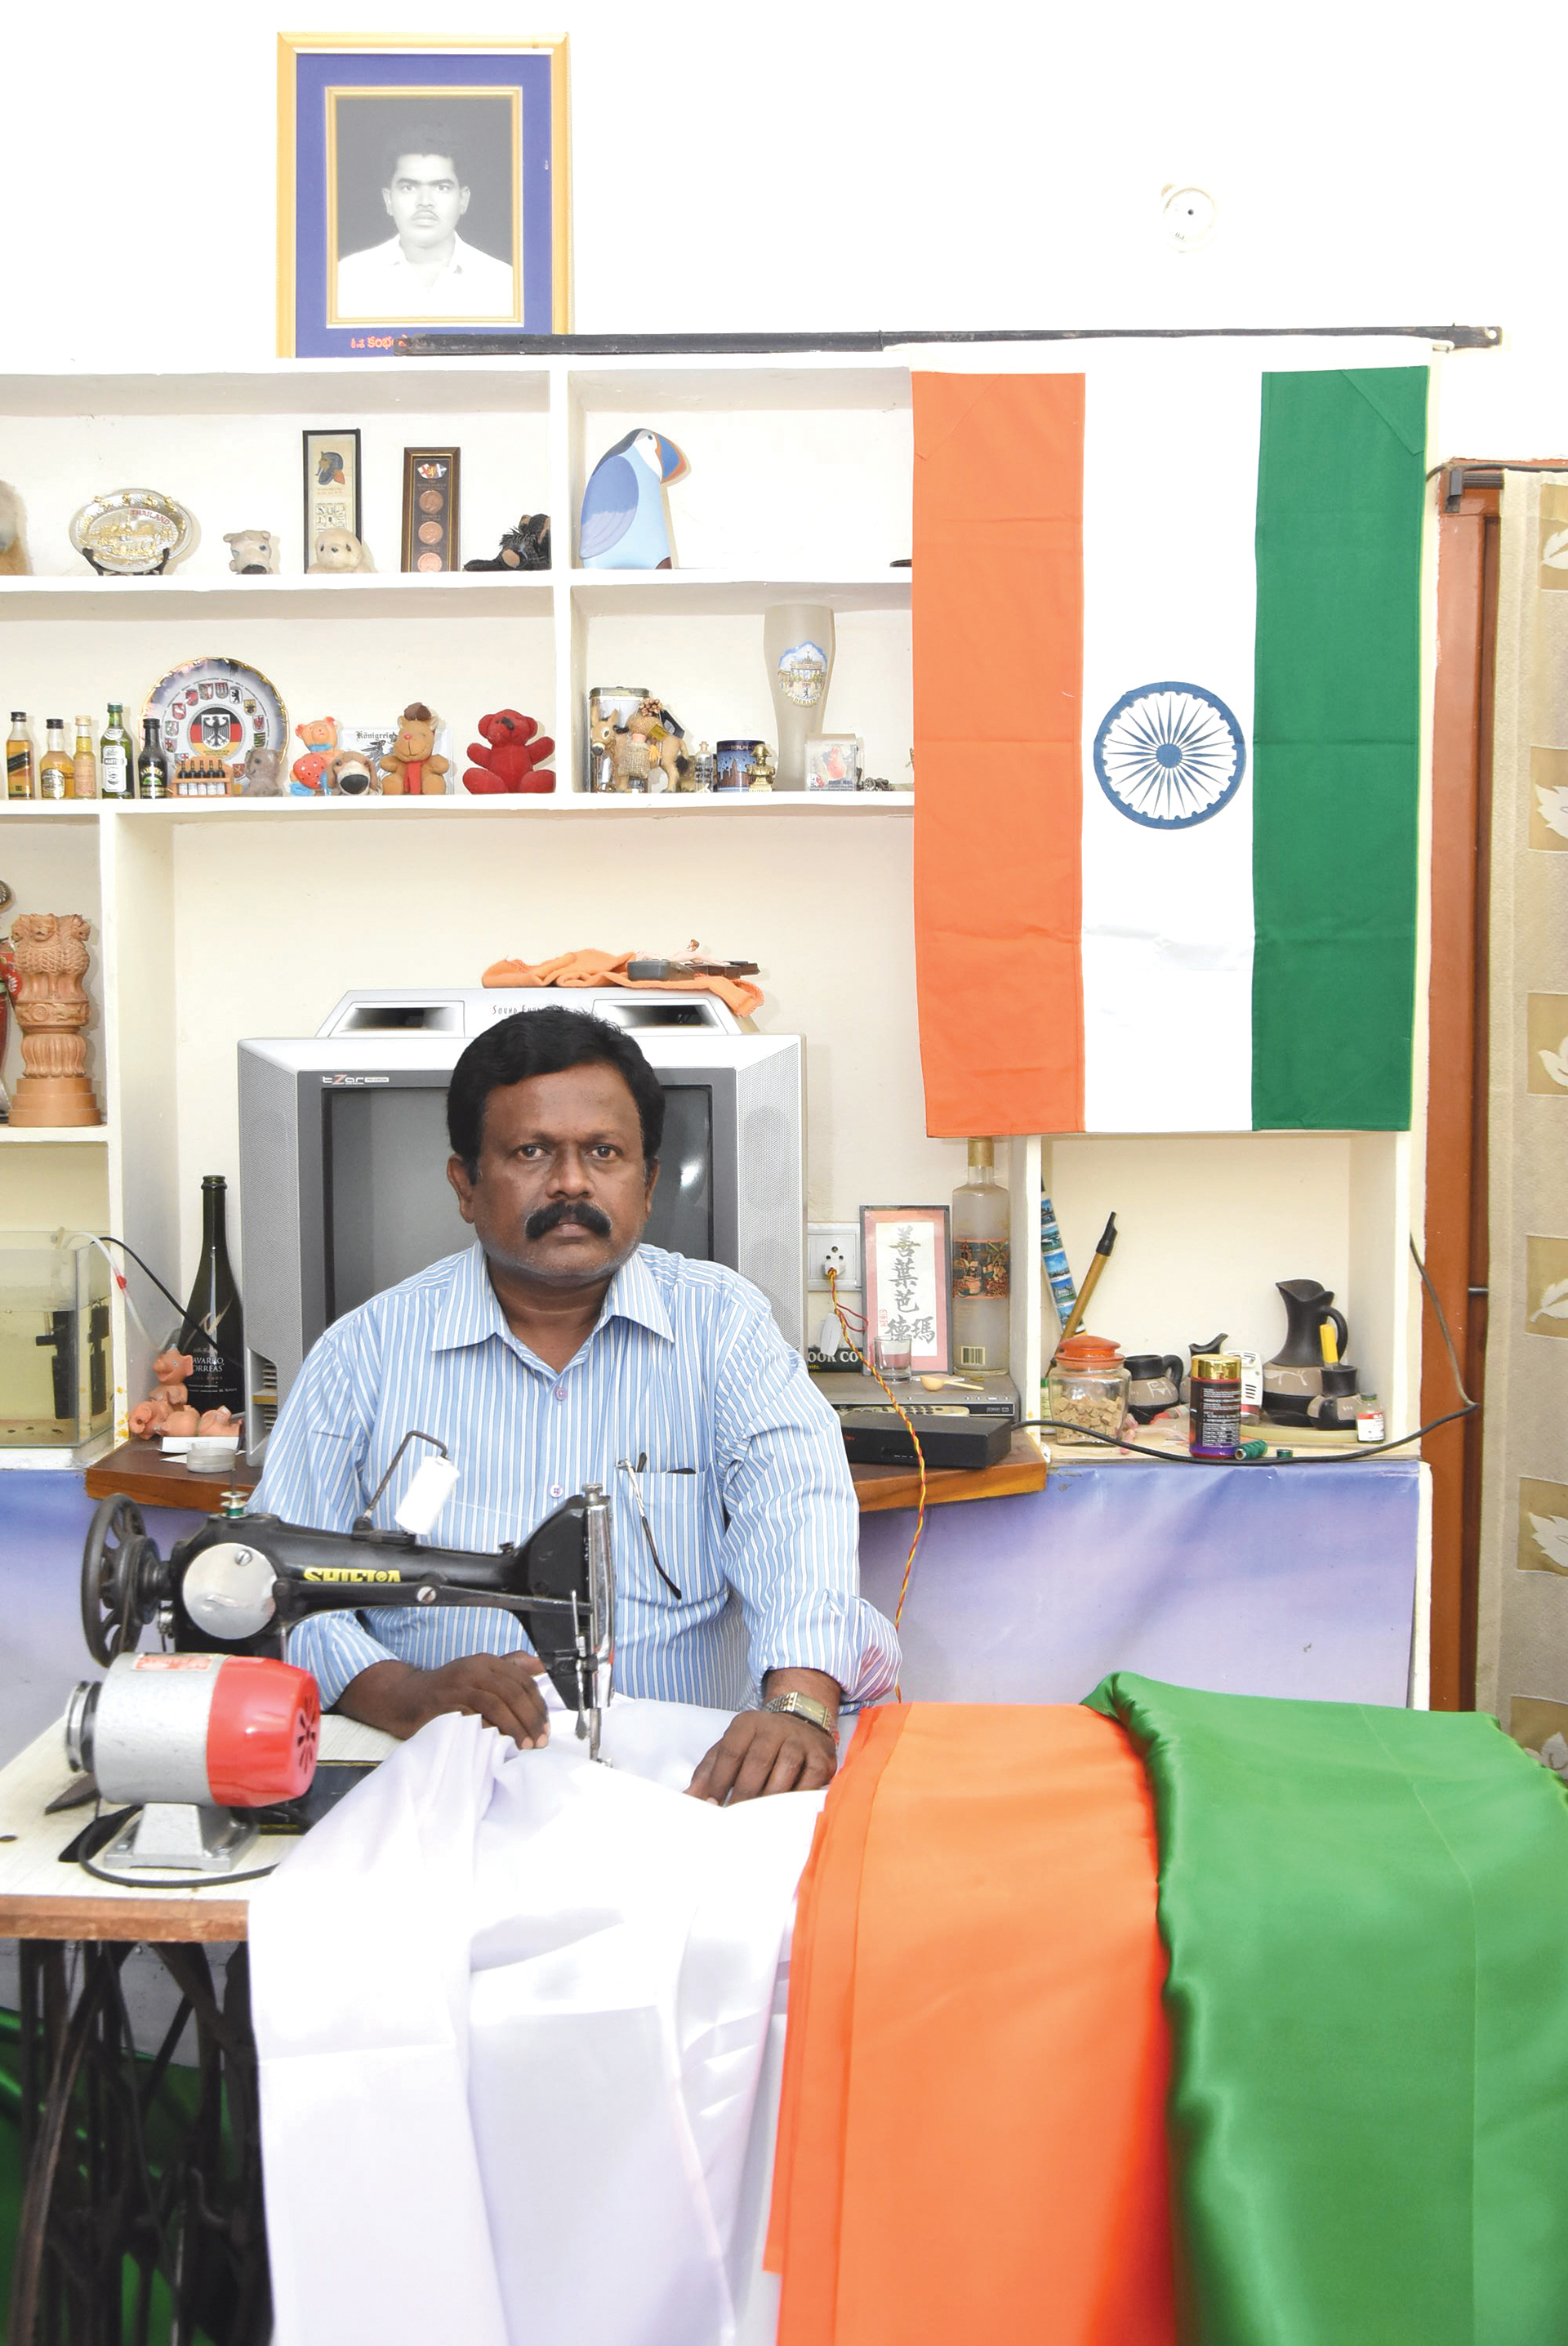 The vexillologist behind the largest tricolour in Hyderabad